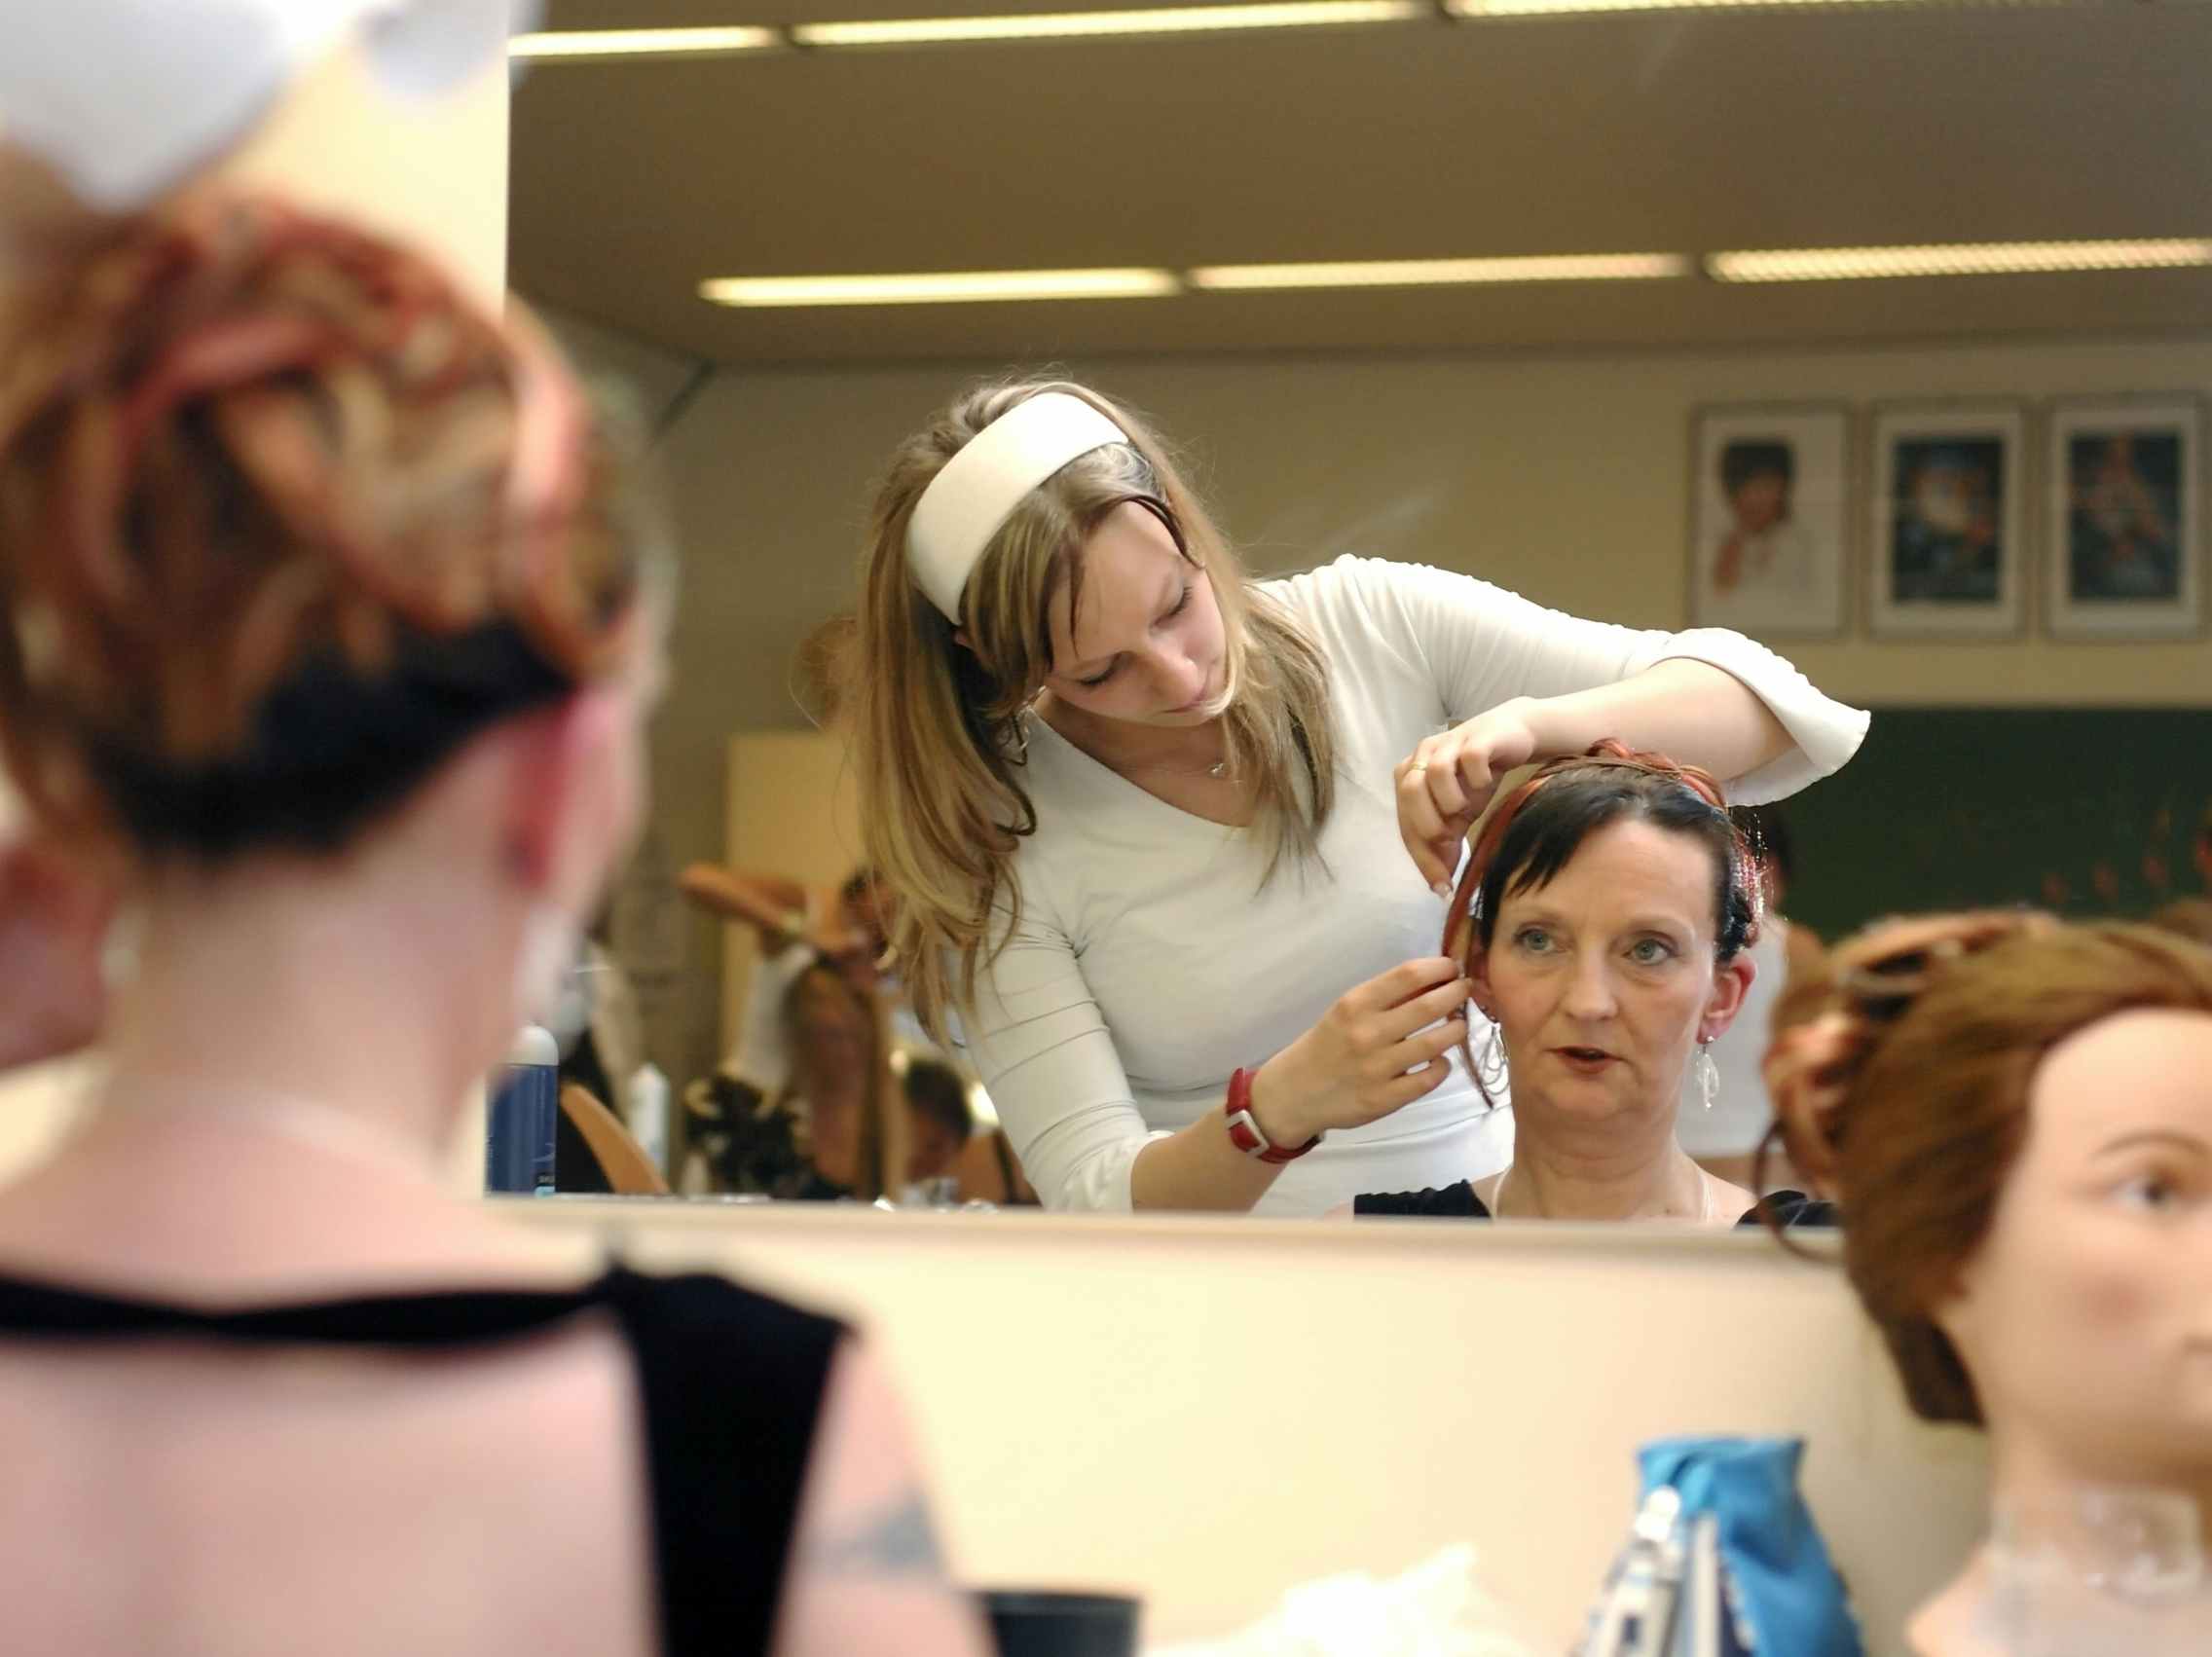 A hair dresser practicing on a person's hair